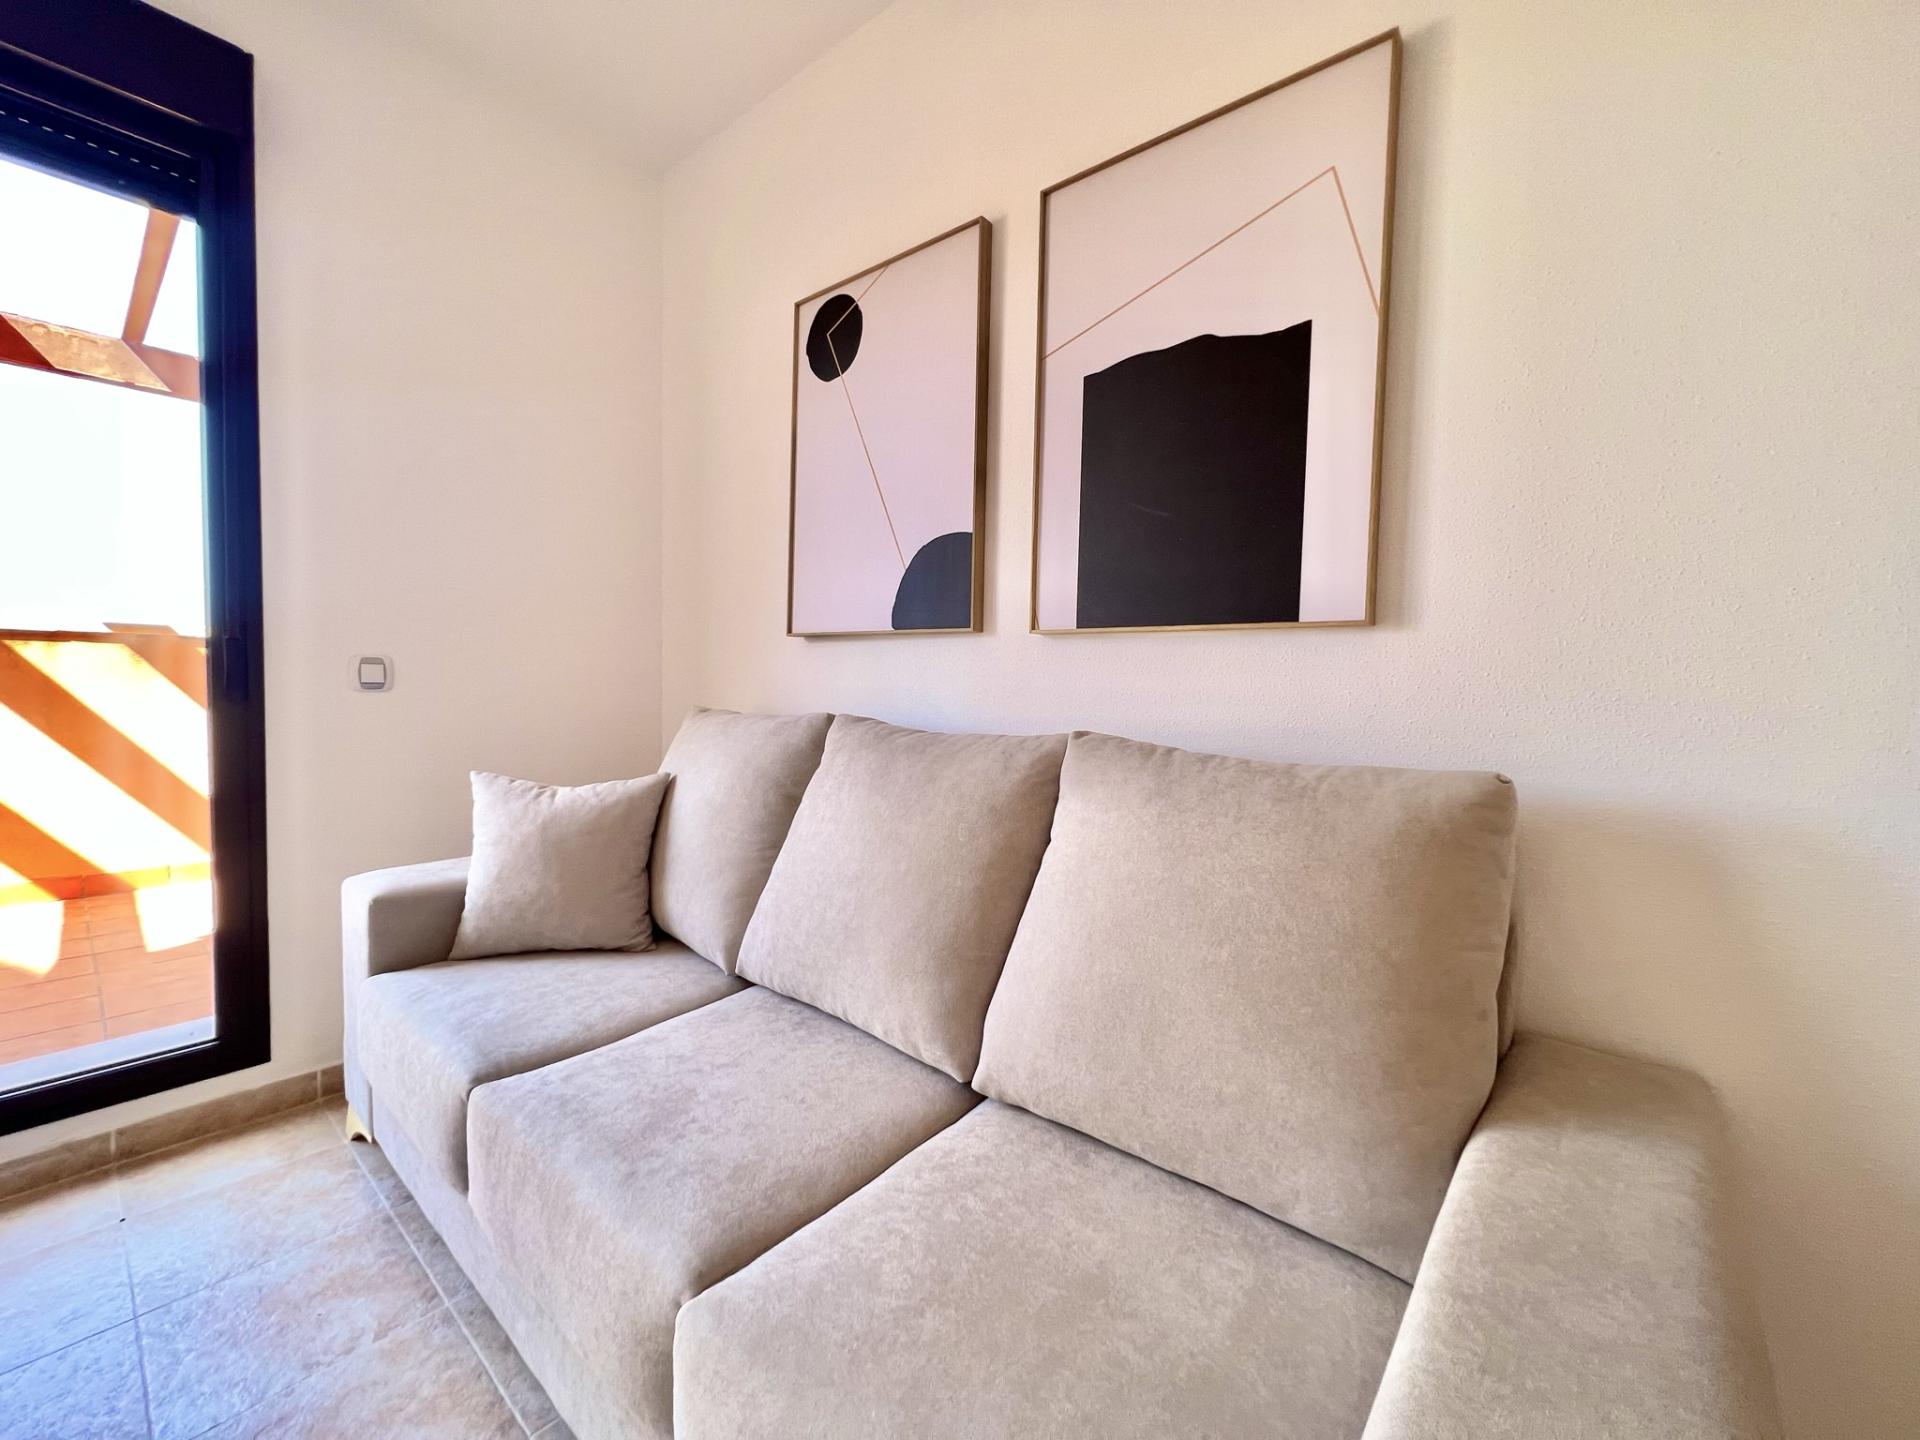 2 bedroom Apartment with terrace in Aguilas - New build in Medvilla Spanje